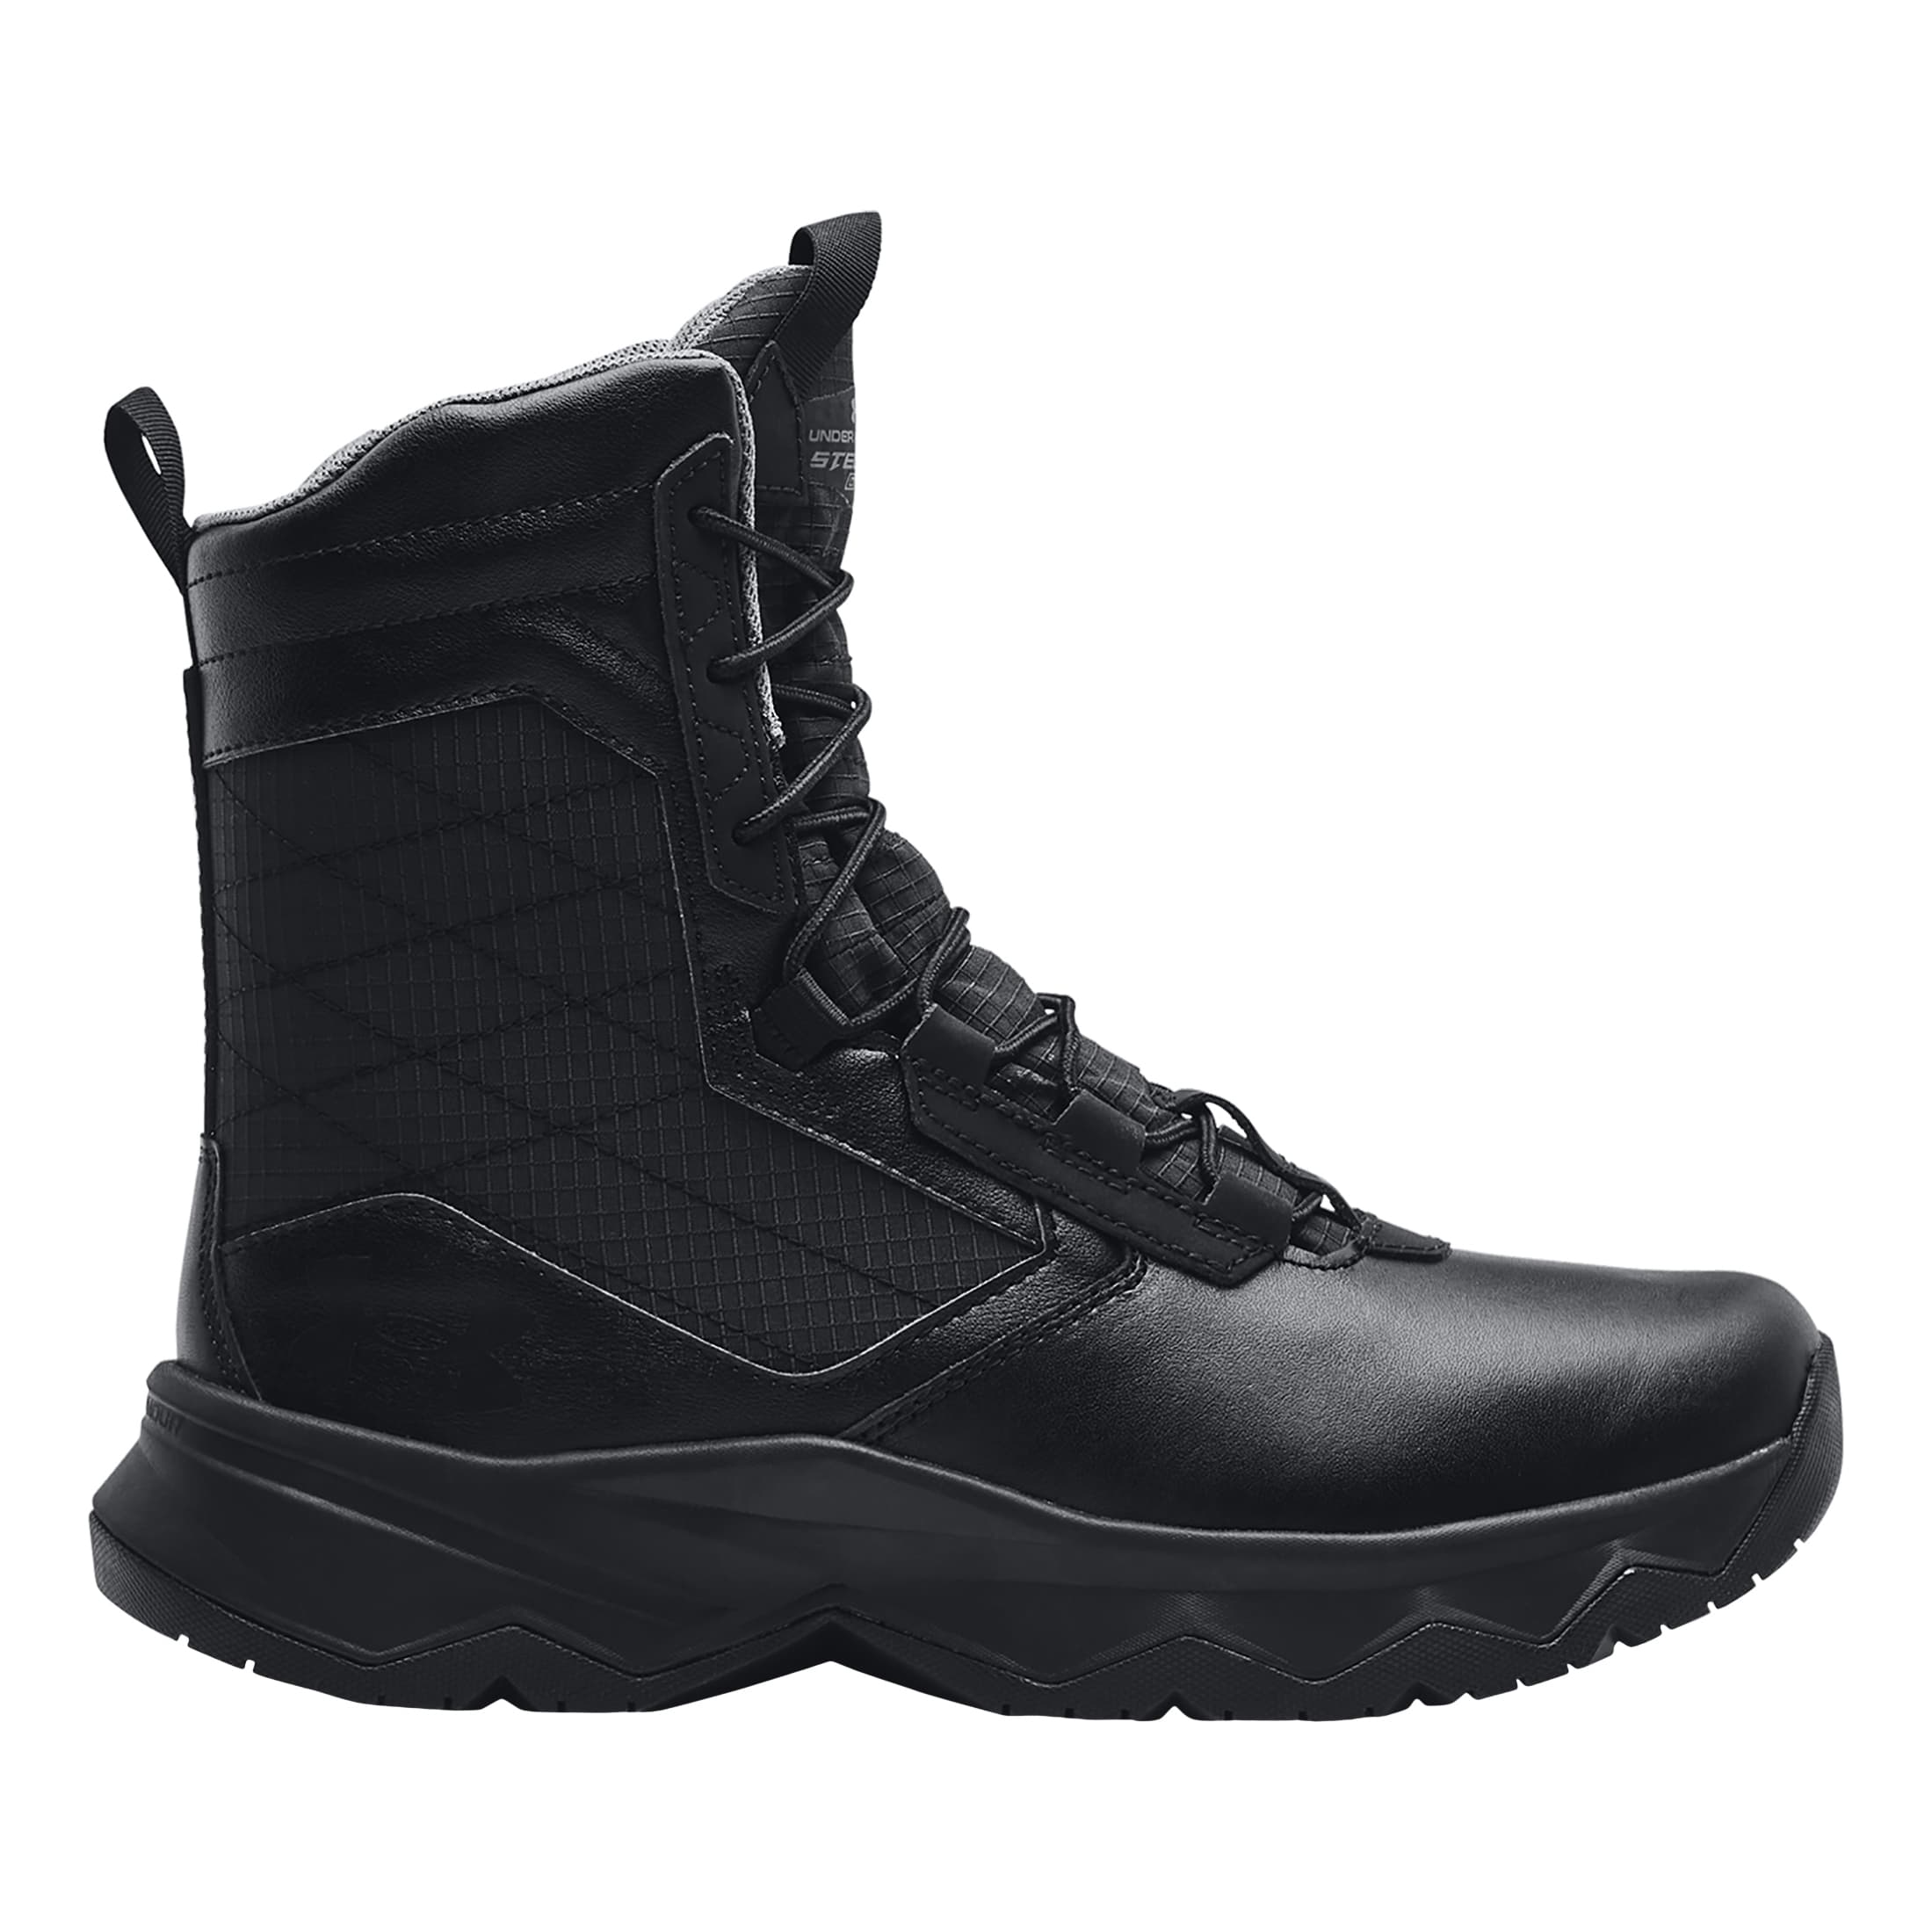  Under Armour Men's Micro G Valsetz Mid Military and Tactical  Boot, Black (001)/Black, 8 XW US : Clothing, Shoes & Jewelry